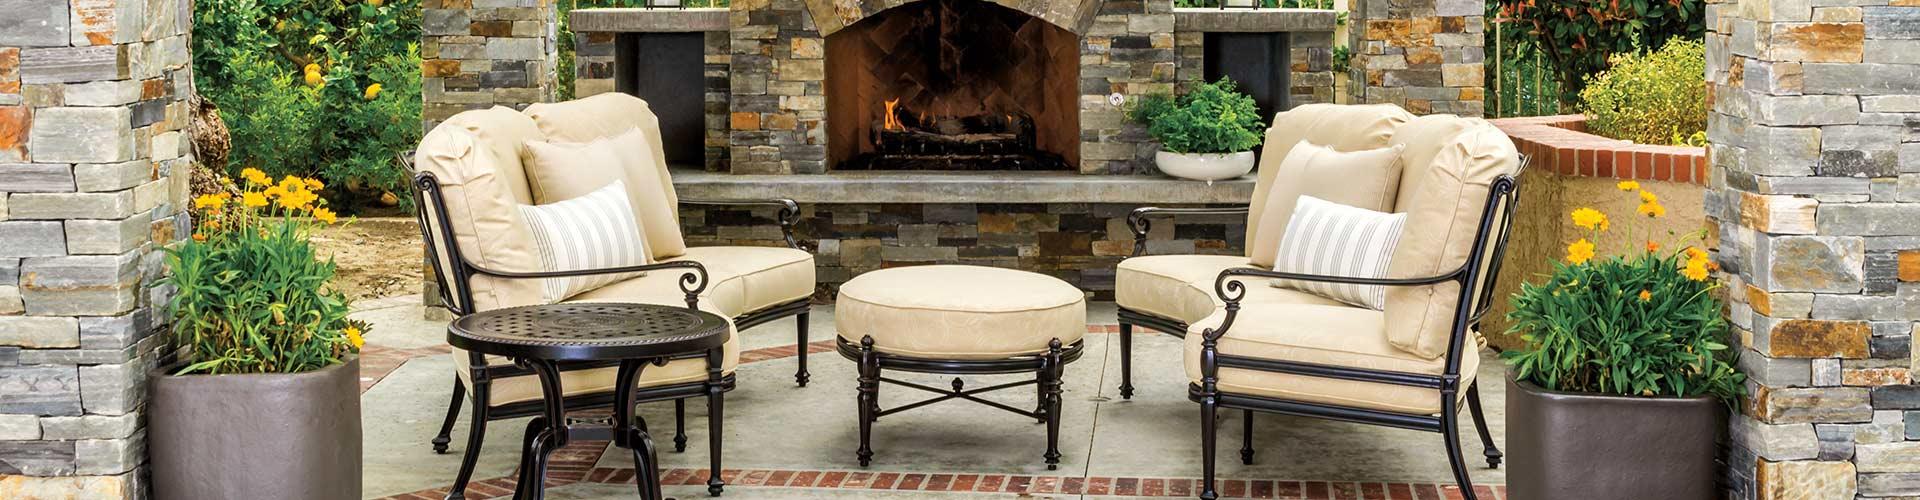 OUTDOOR LIVING • FURNITURE • FIREPLACES • KITCHENS